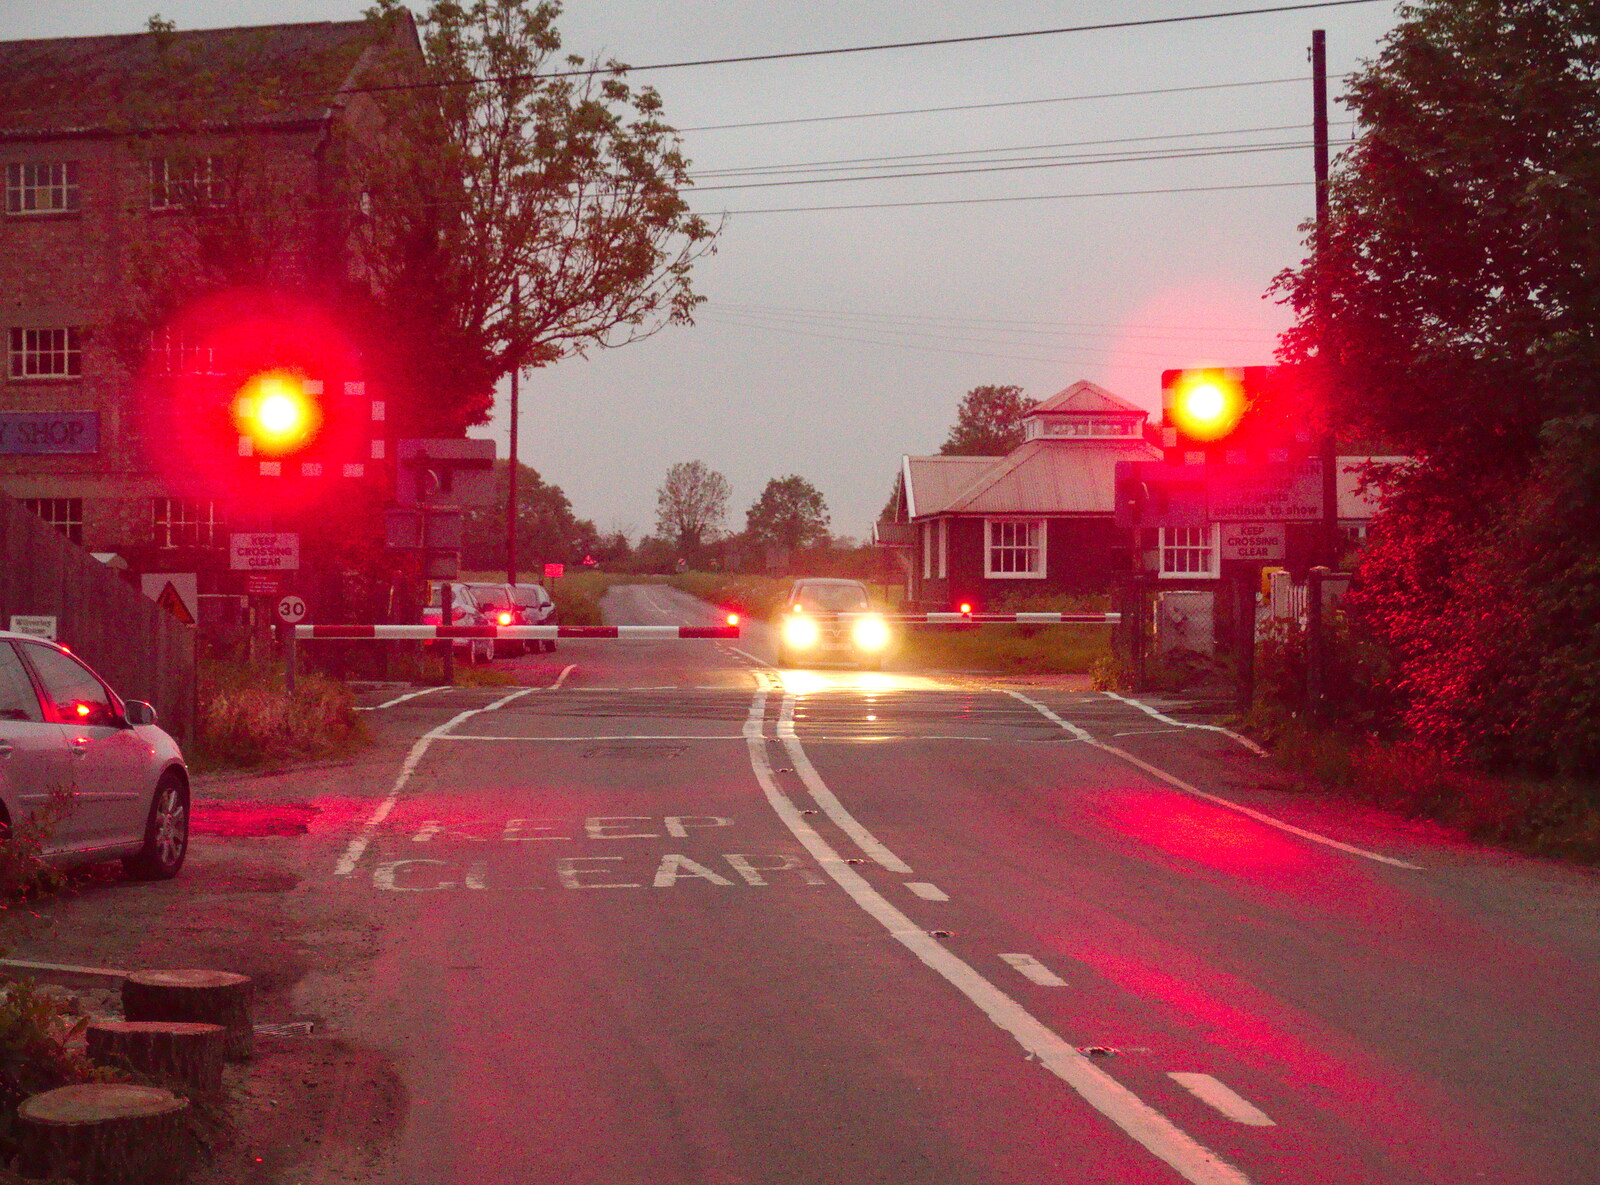 The BSCC at the Railway Tavern, Mellis, Suffolk - 28th May 2014: Traffic waits for an oncoming train